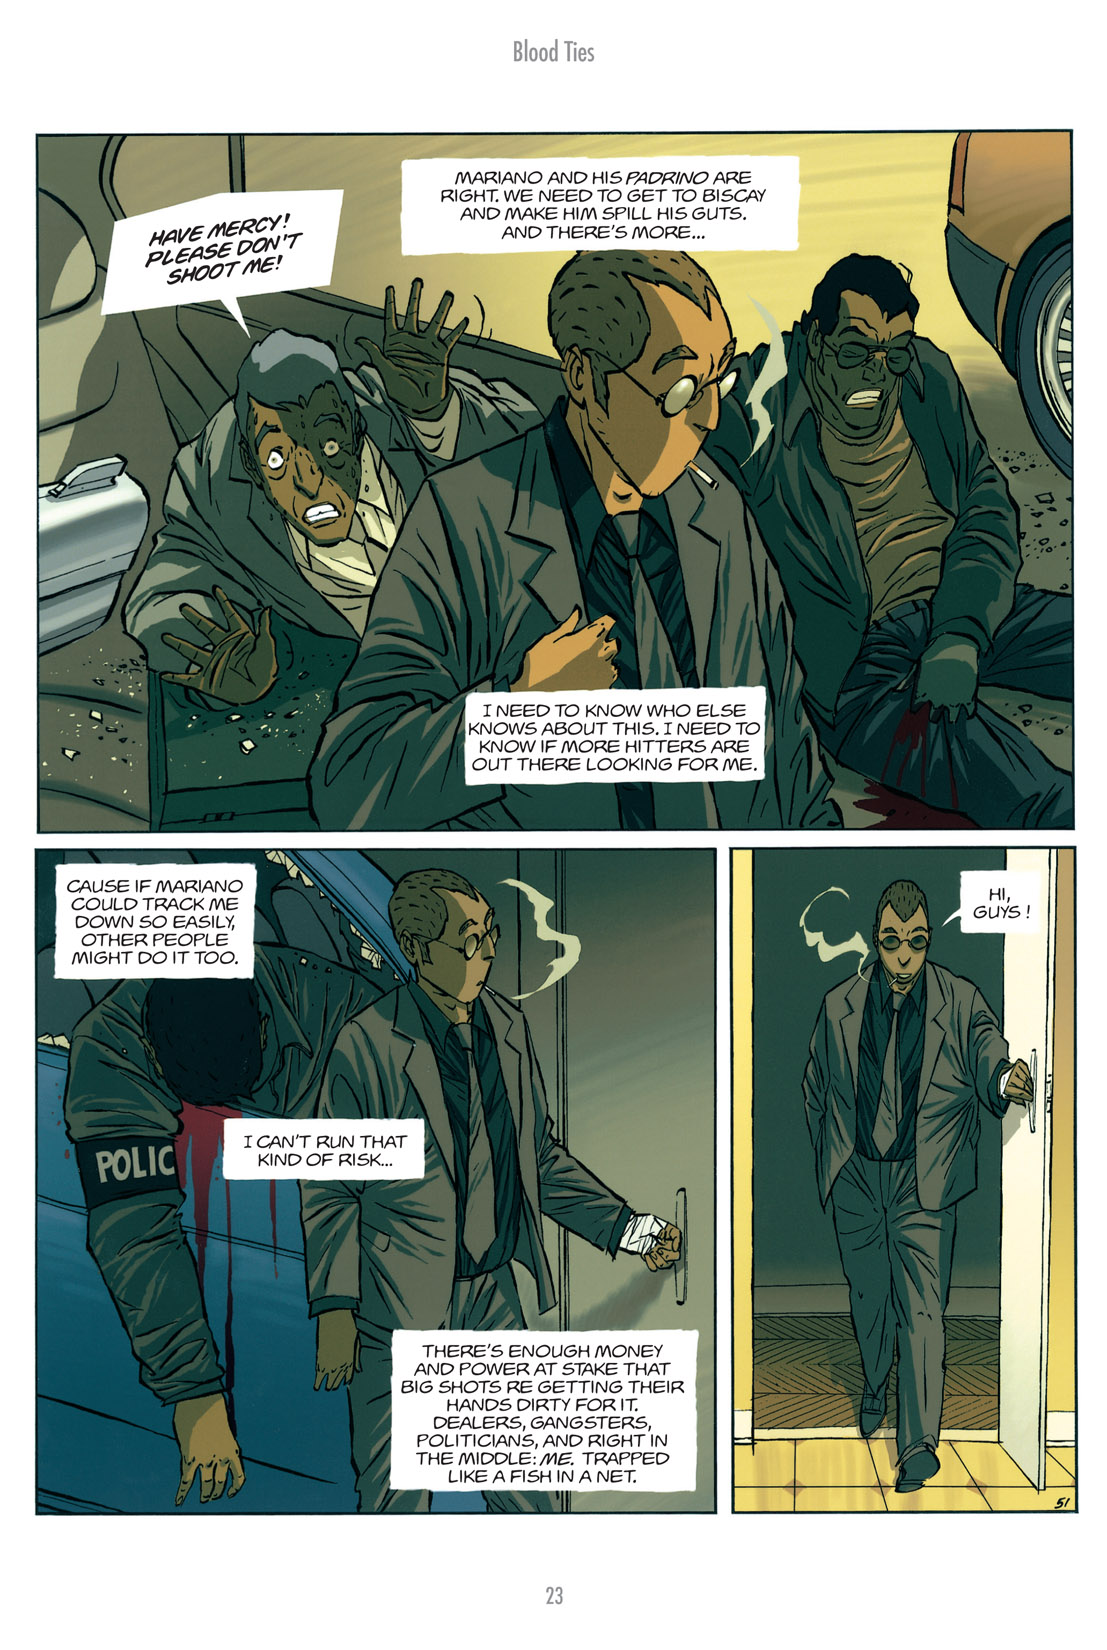 Read online The Killer comic -  Issue # TPB 2 - 122